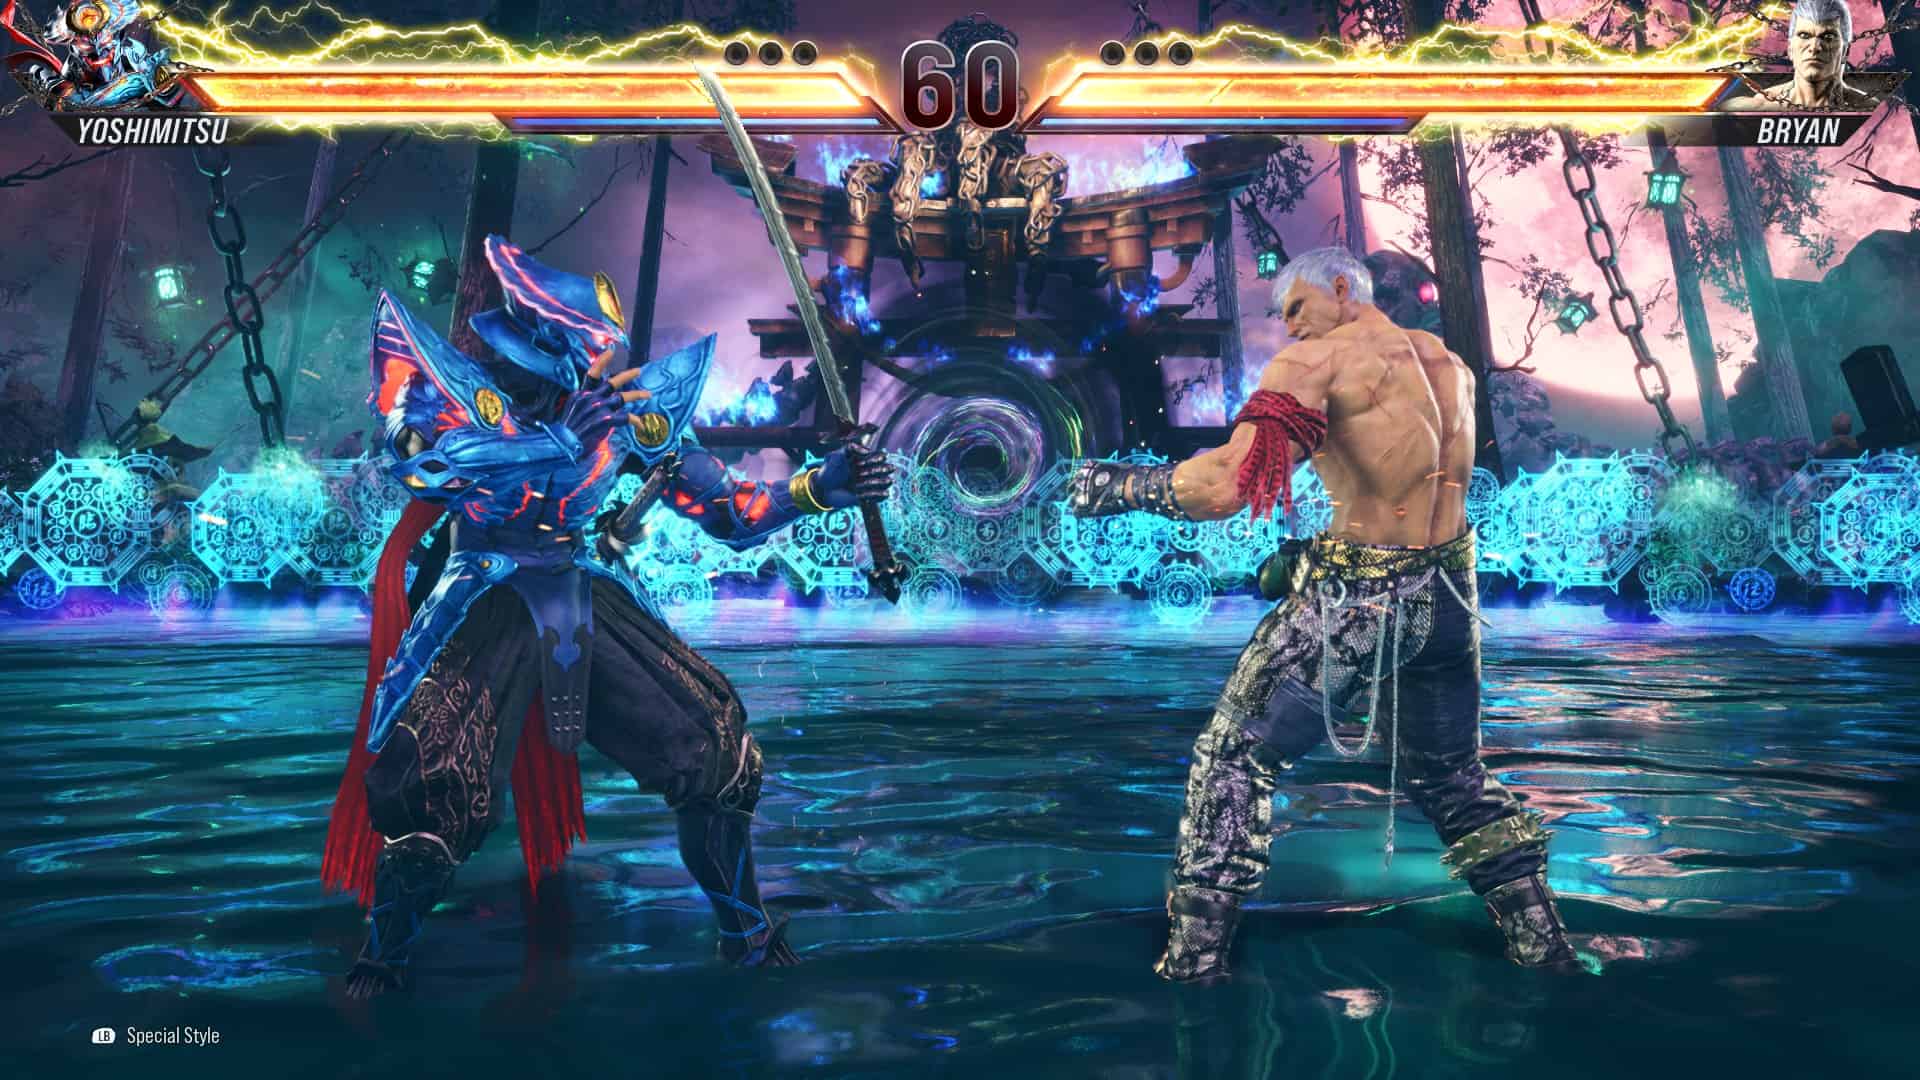 Tekken 8 stages: Yoshimitsu fighting Bryan on the Into the Subconscious stage